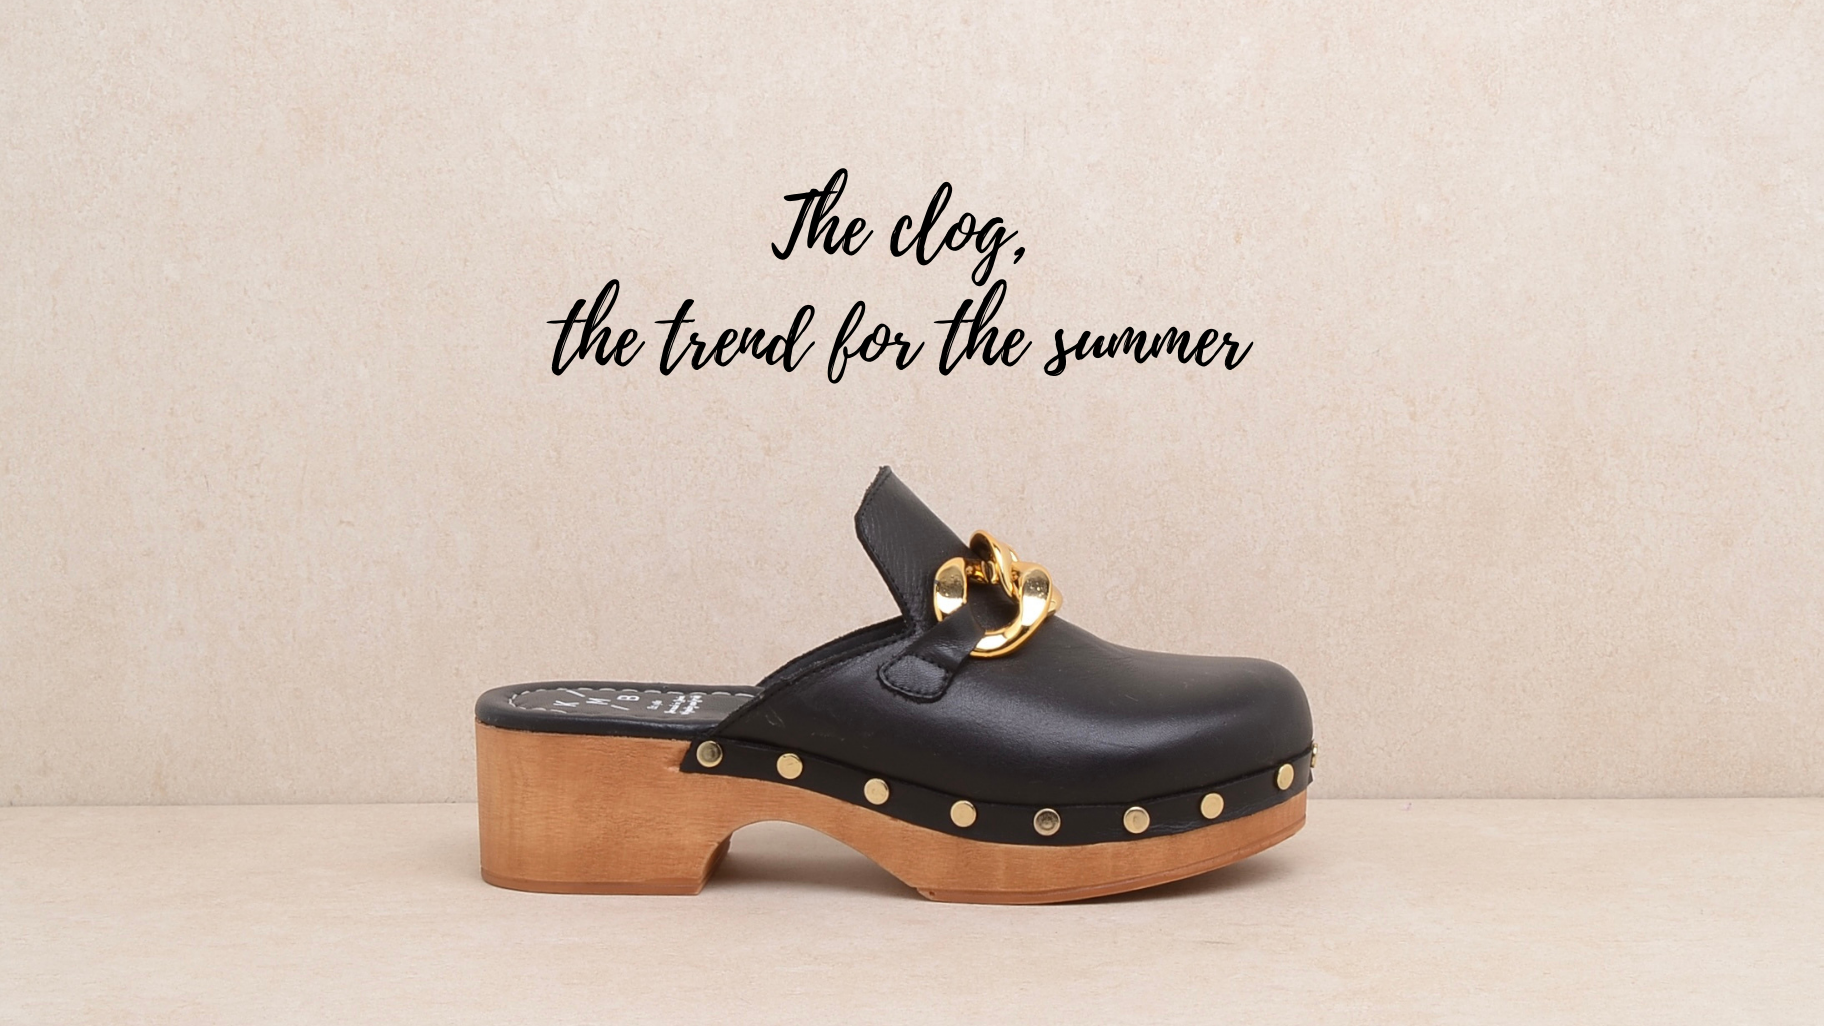 The clog, the trend for the summer